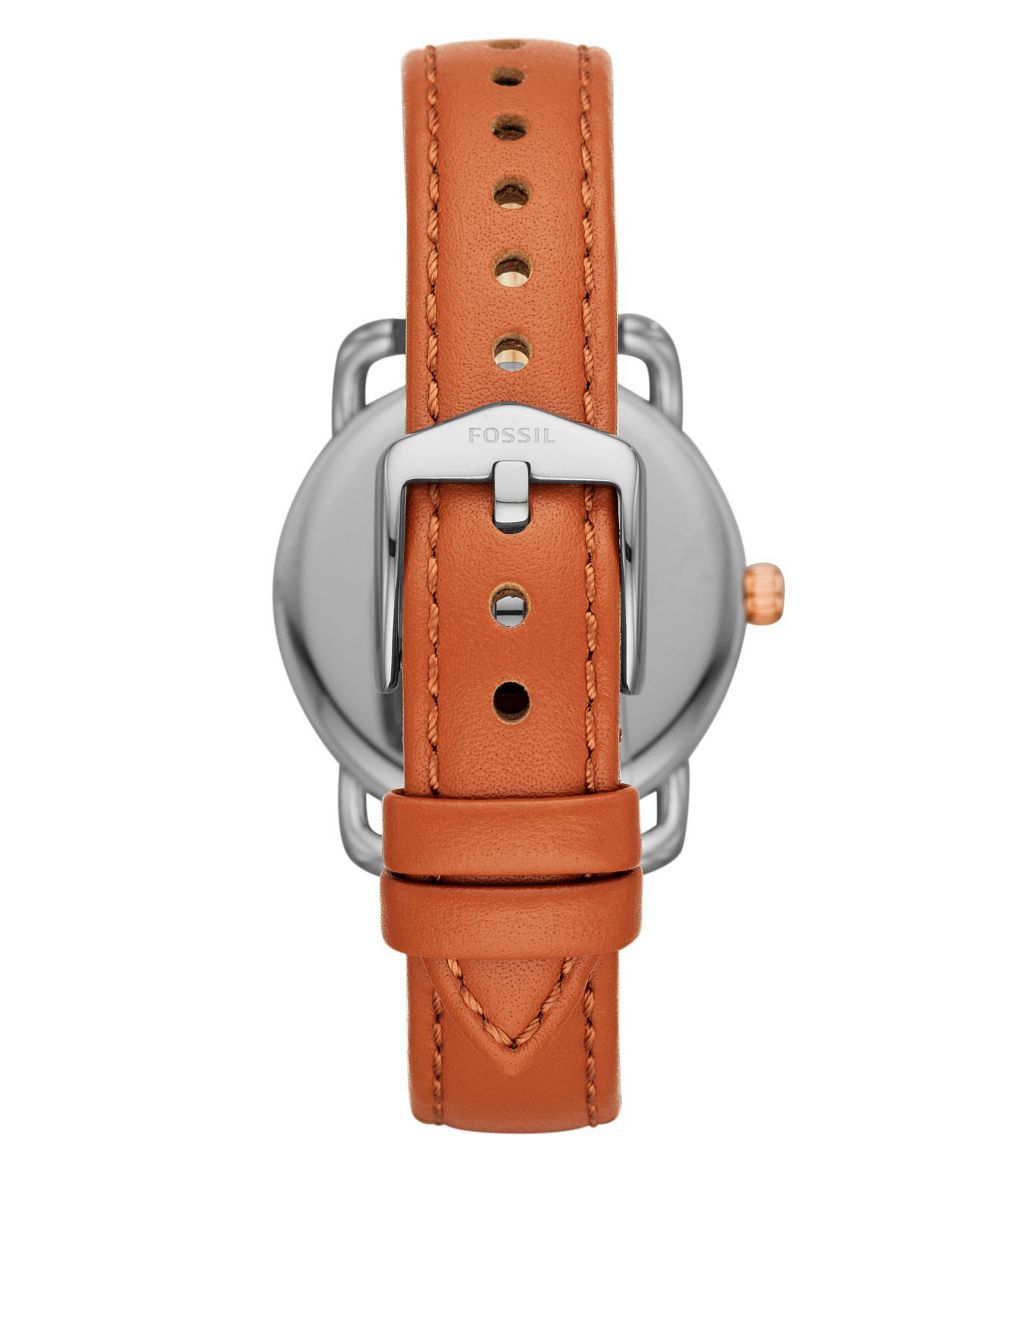 Fossil Copeland Tan Leather Watch image 3